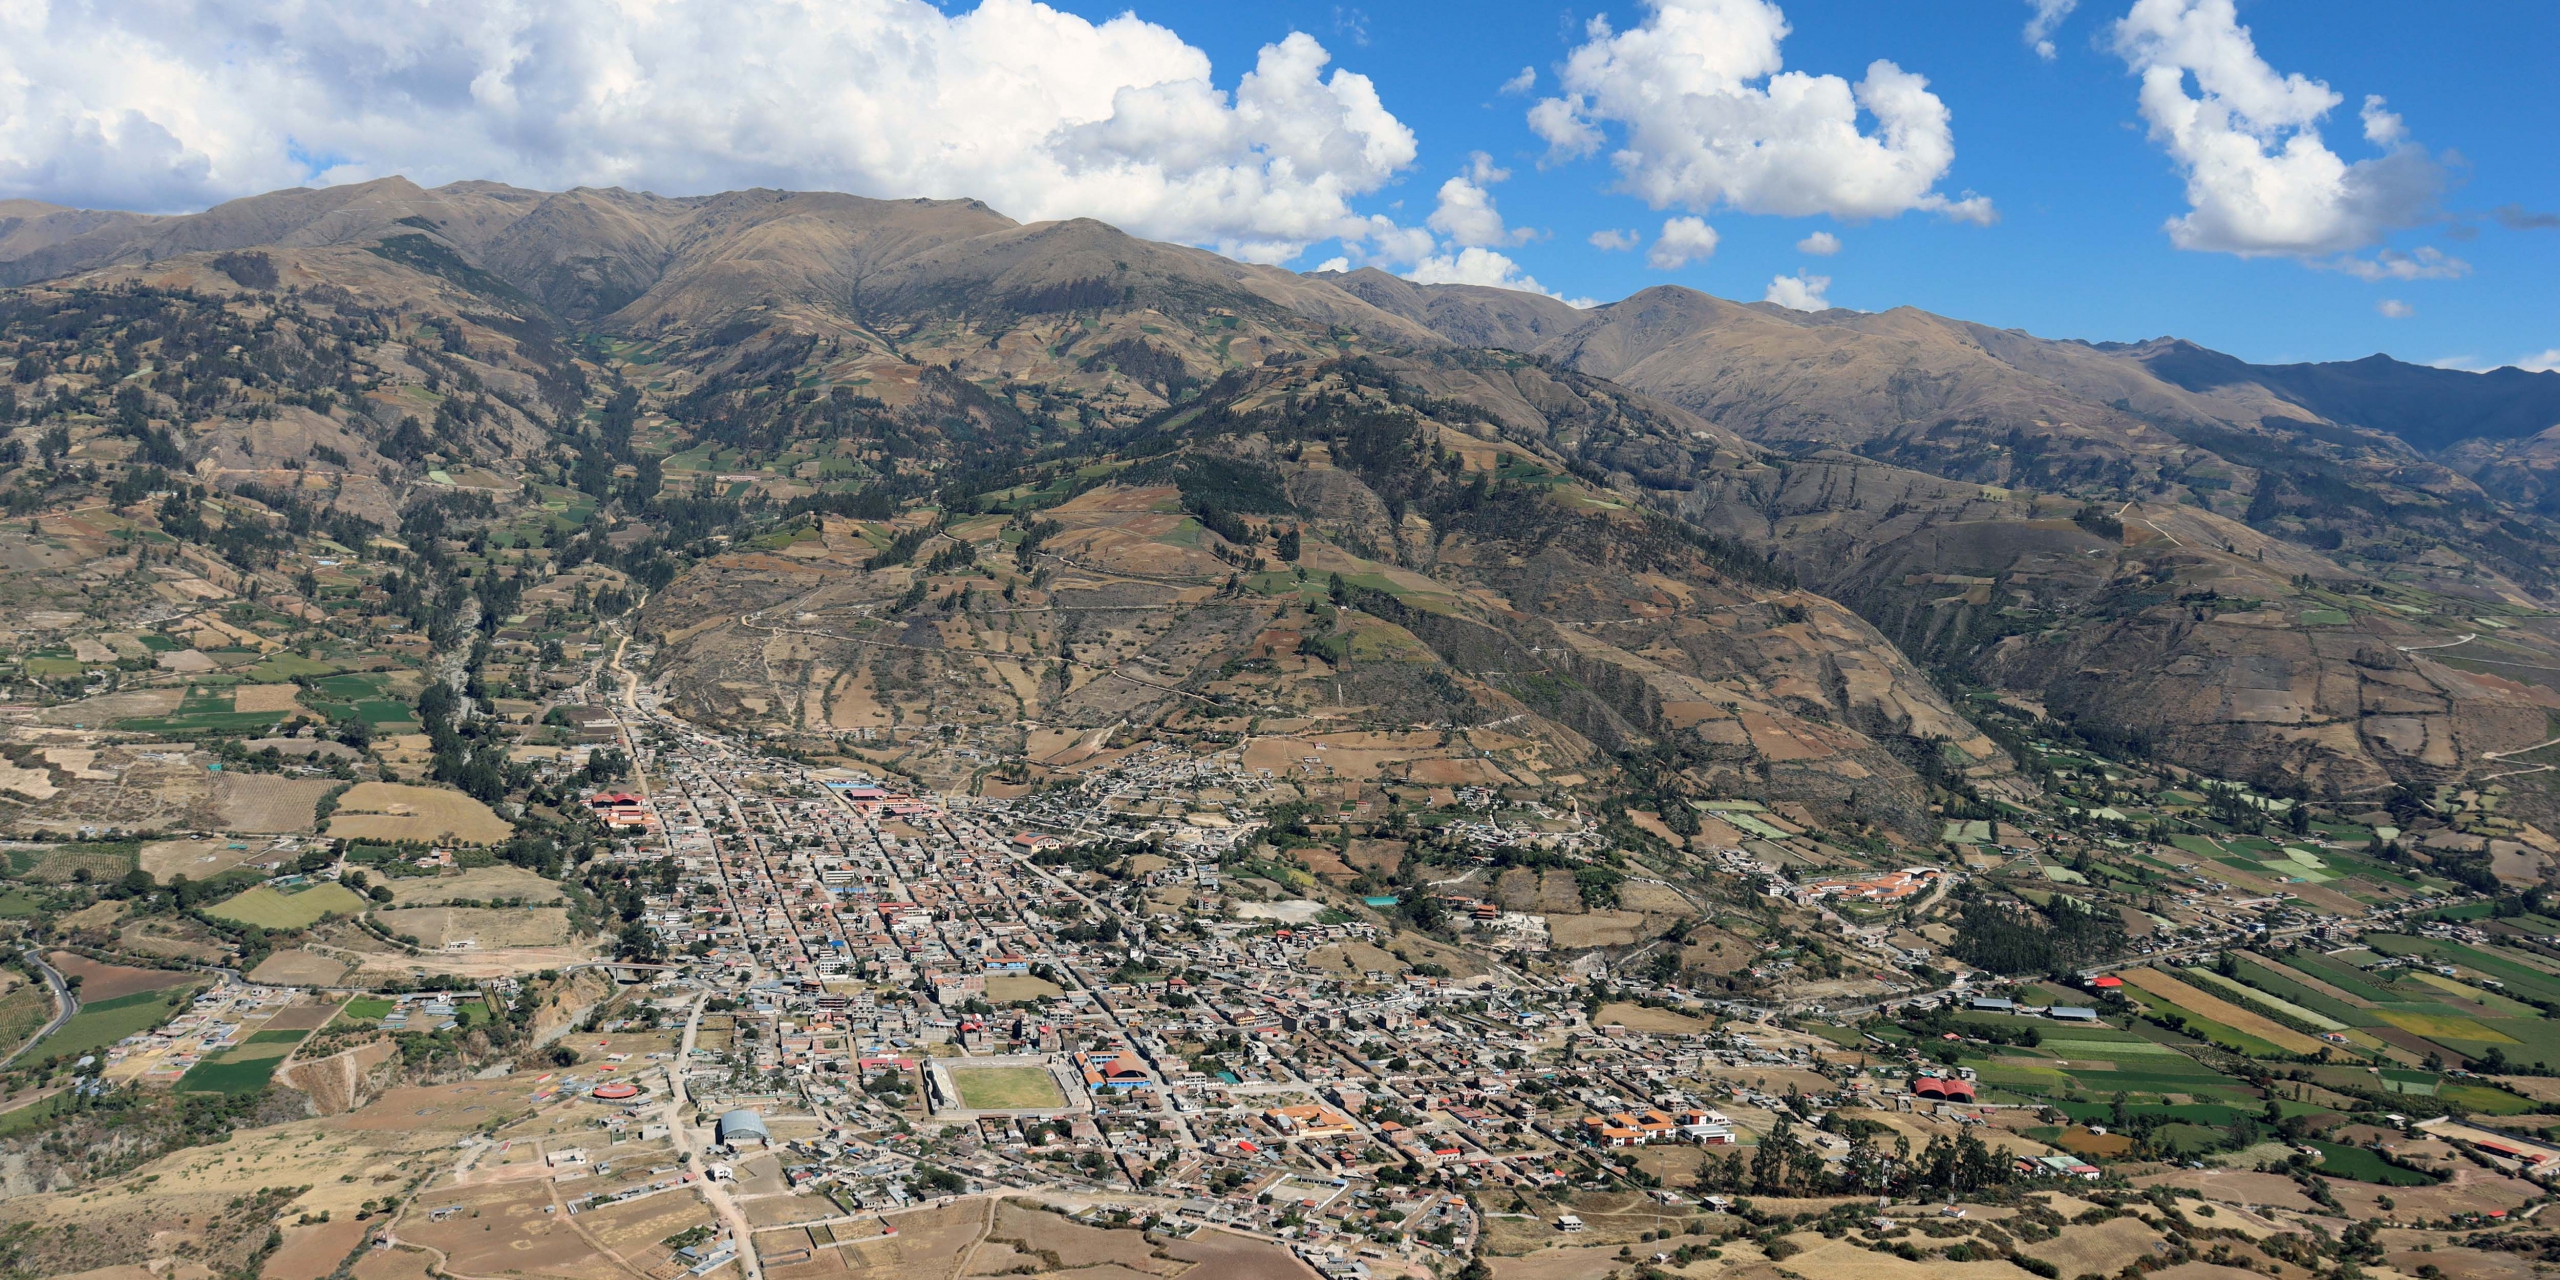 A town in the heart of the Andes